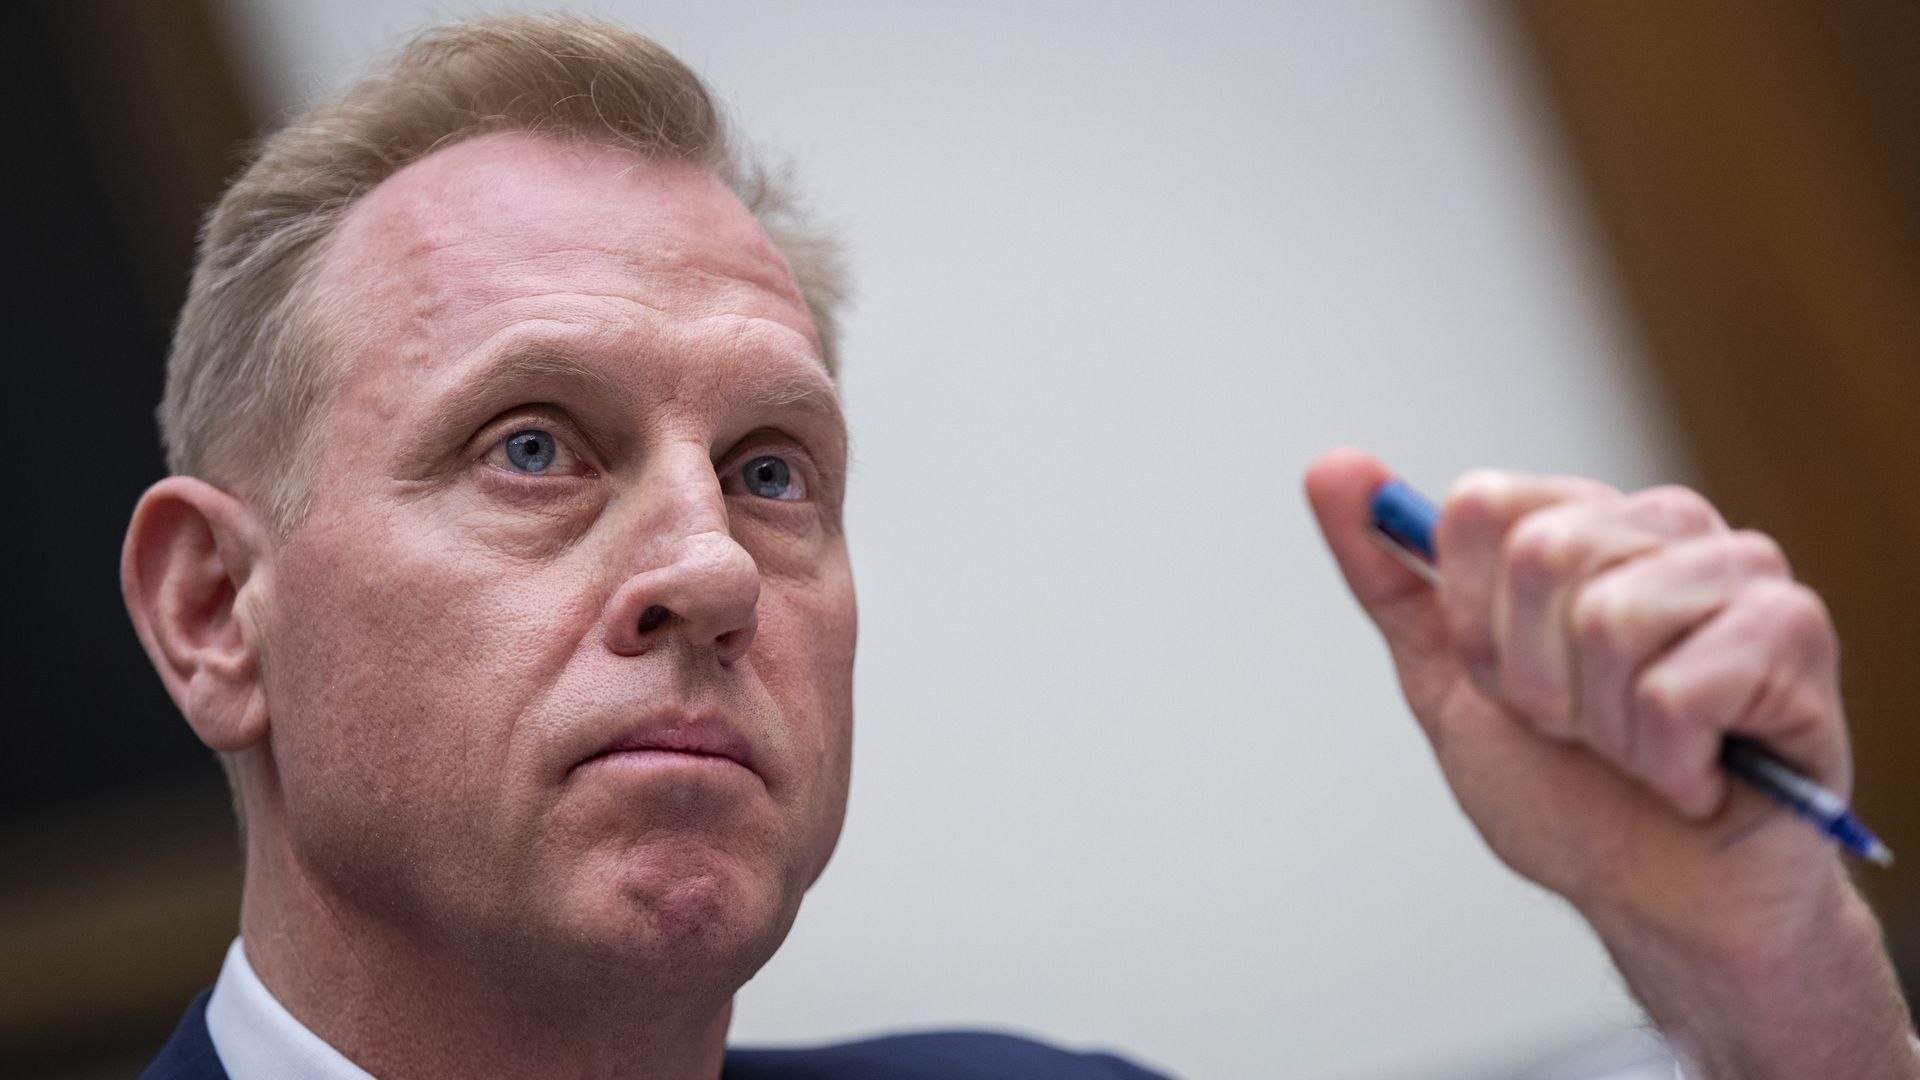 In this image, Patrick Shanahan sits and frowns while holding a pen in his fist.